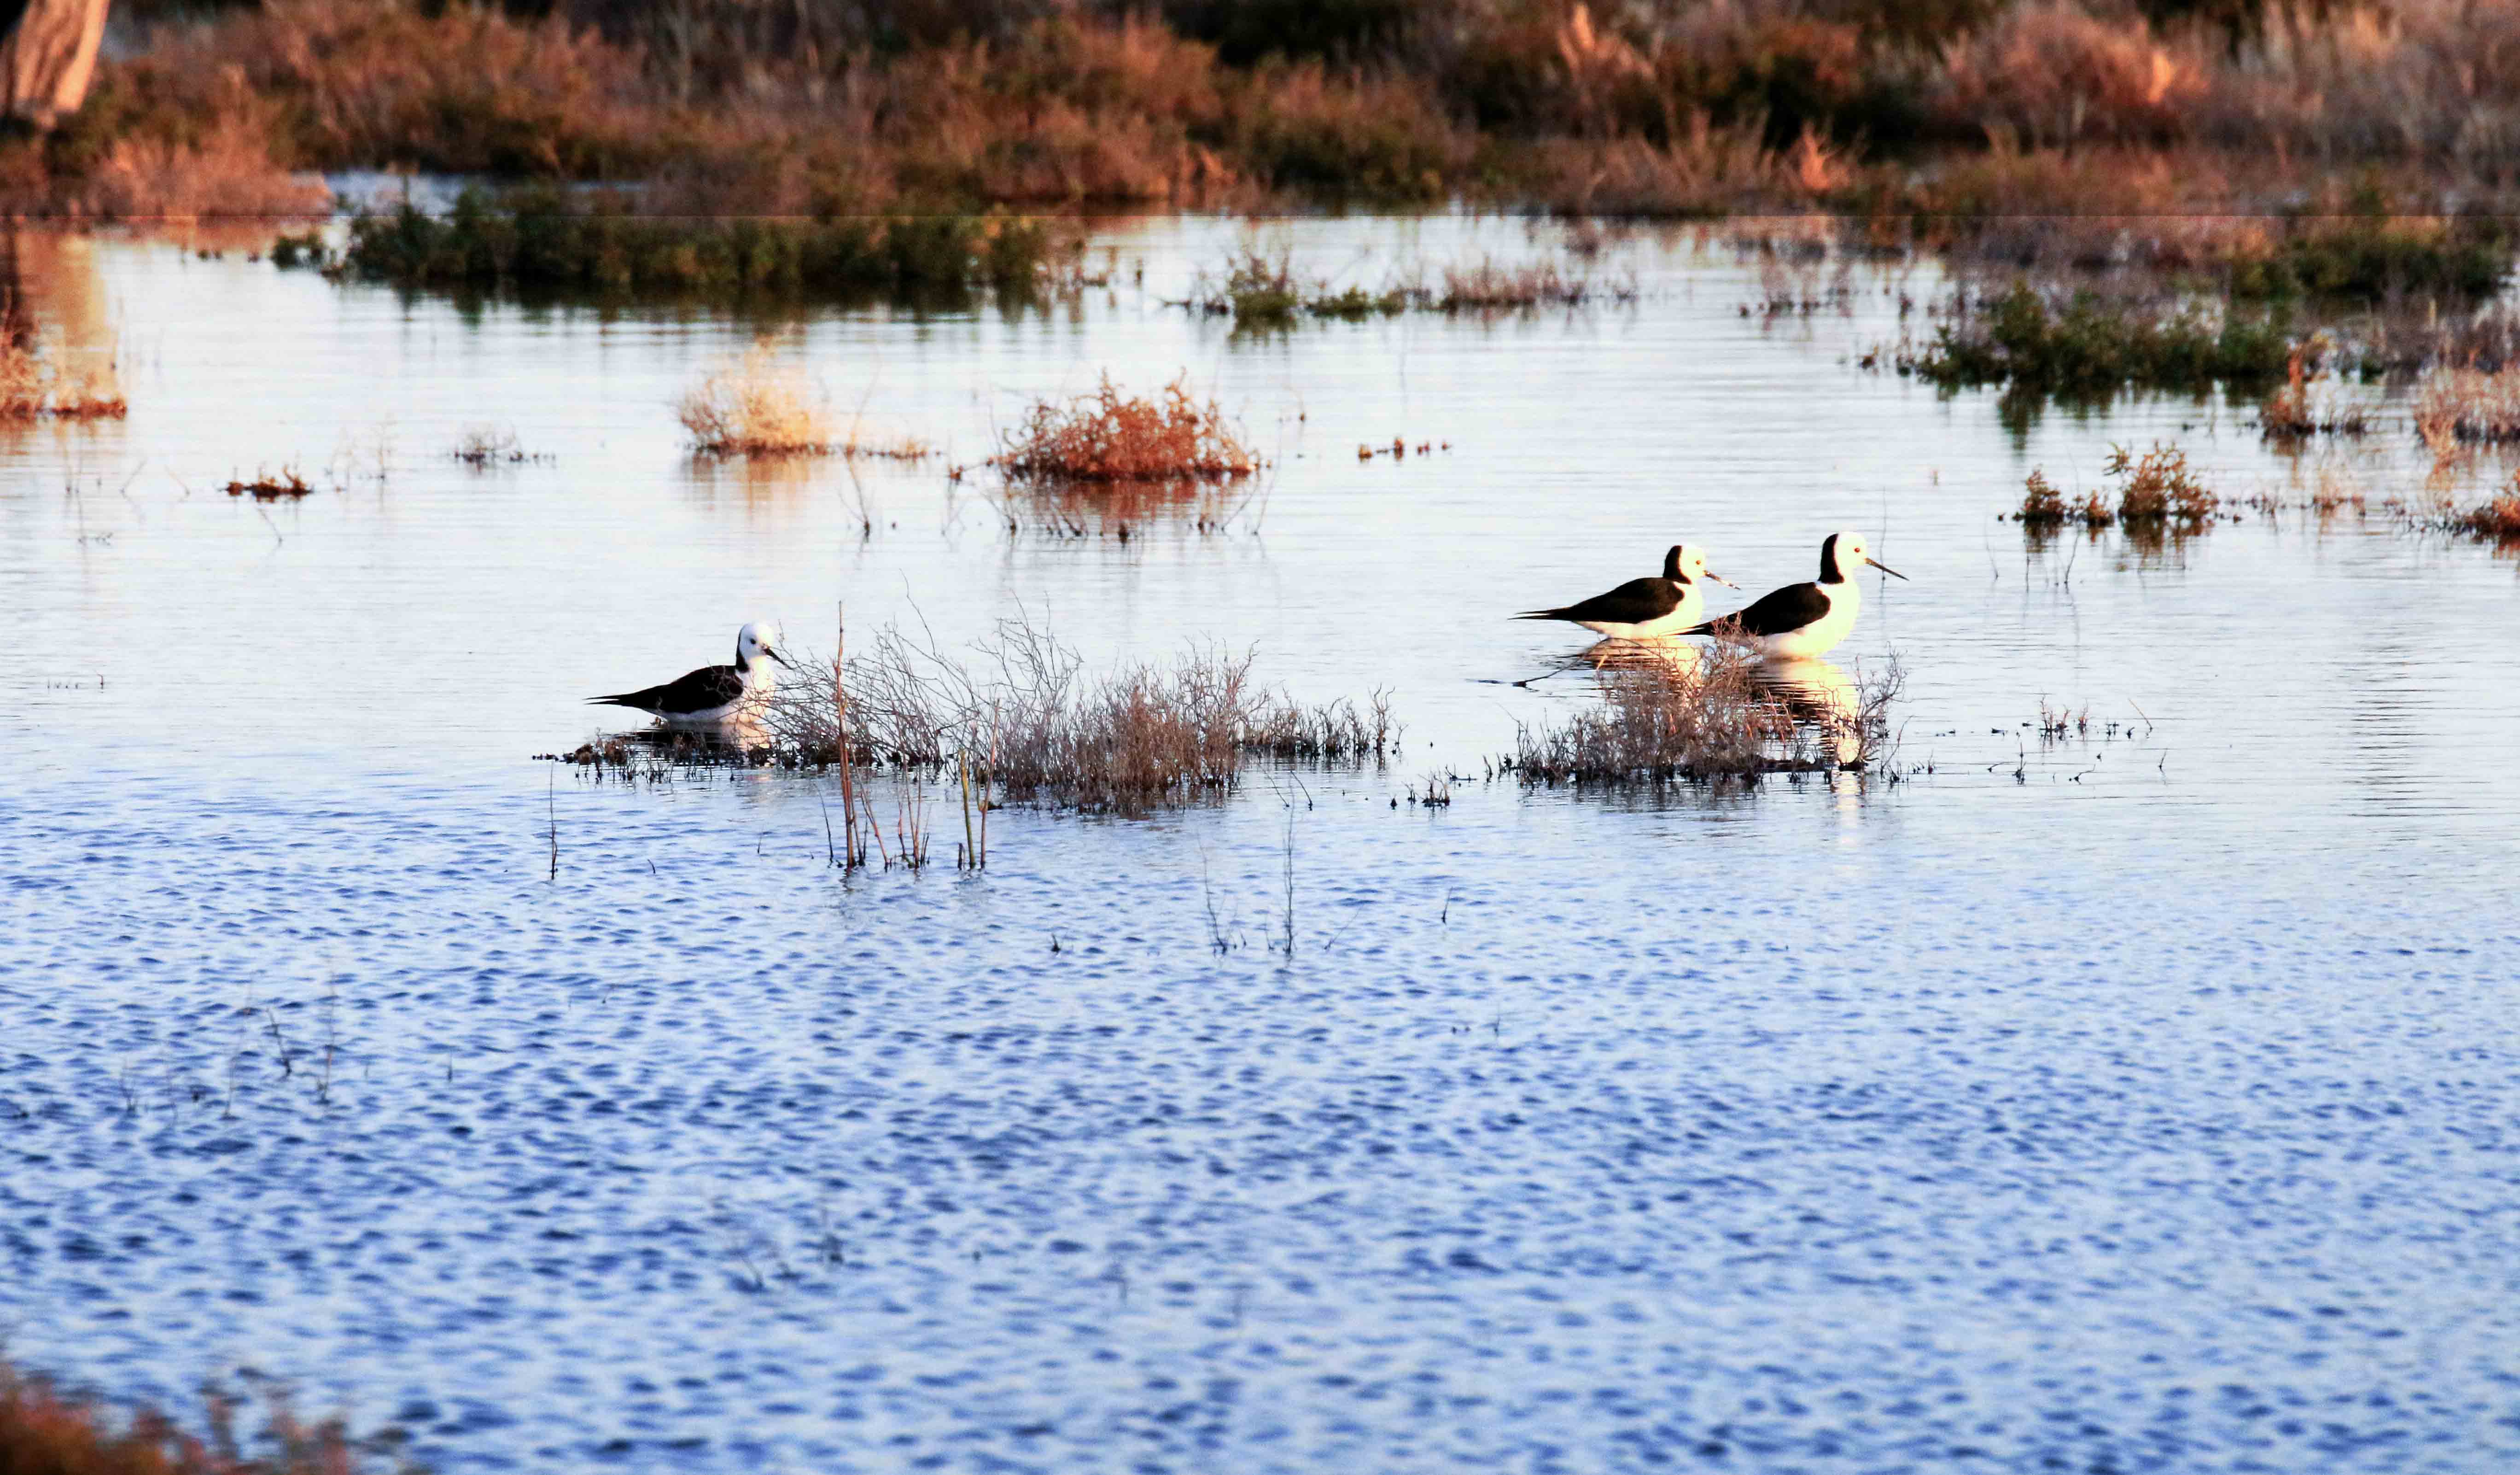 Waterbirds on a lake at sunset